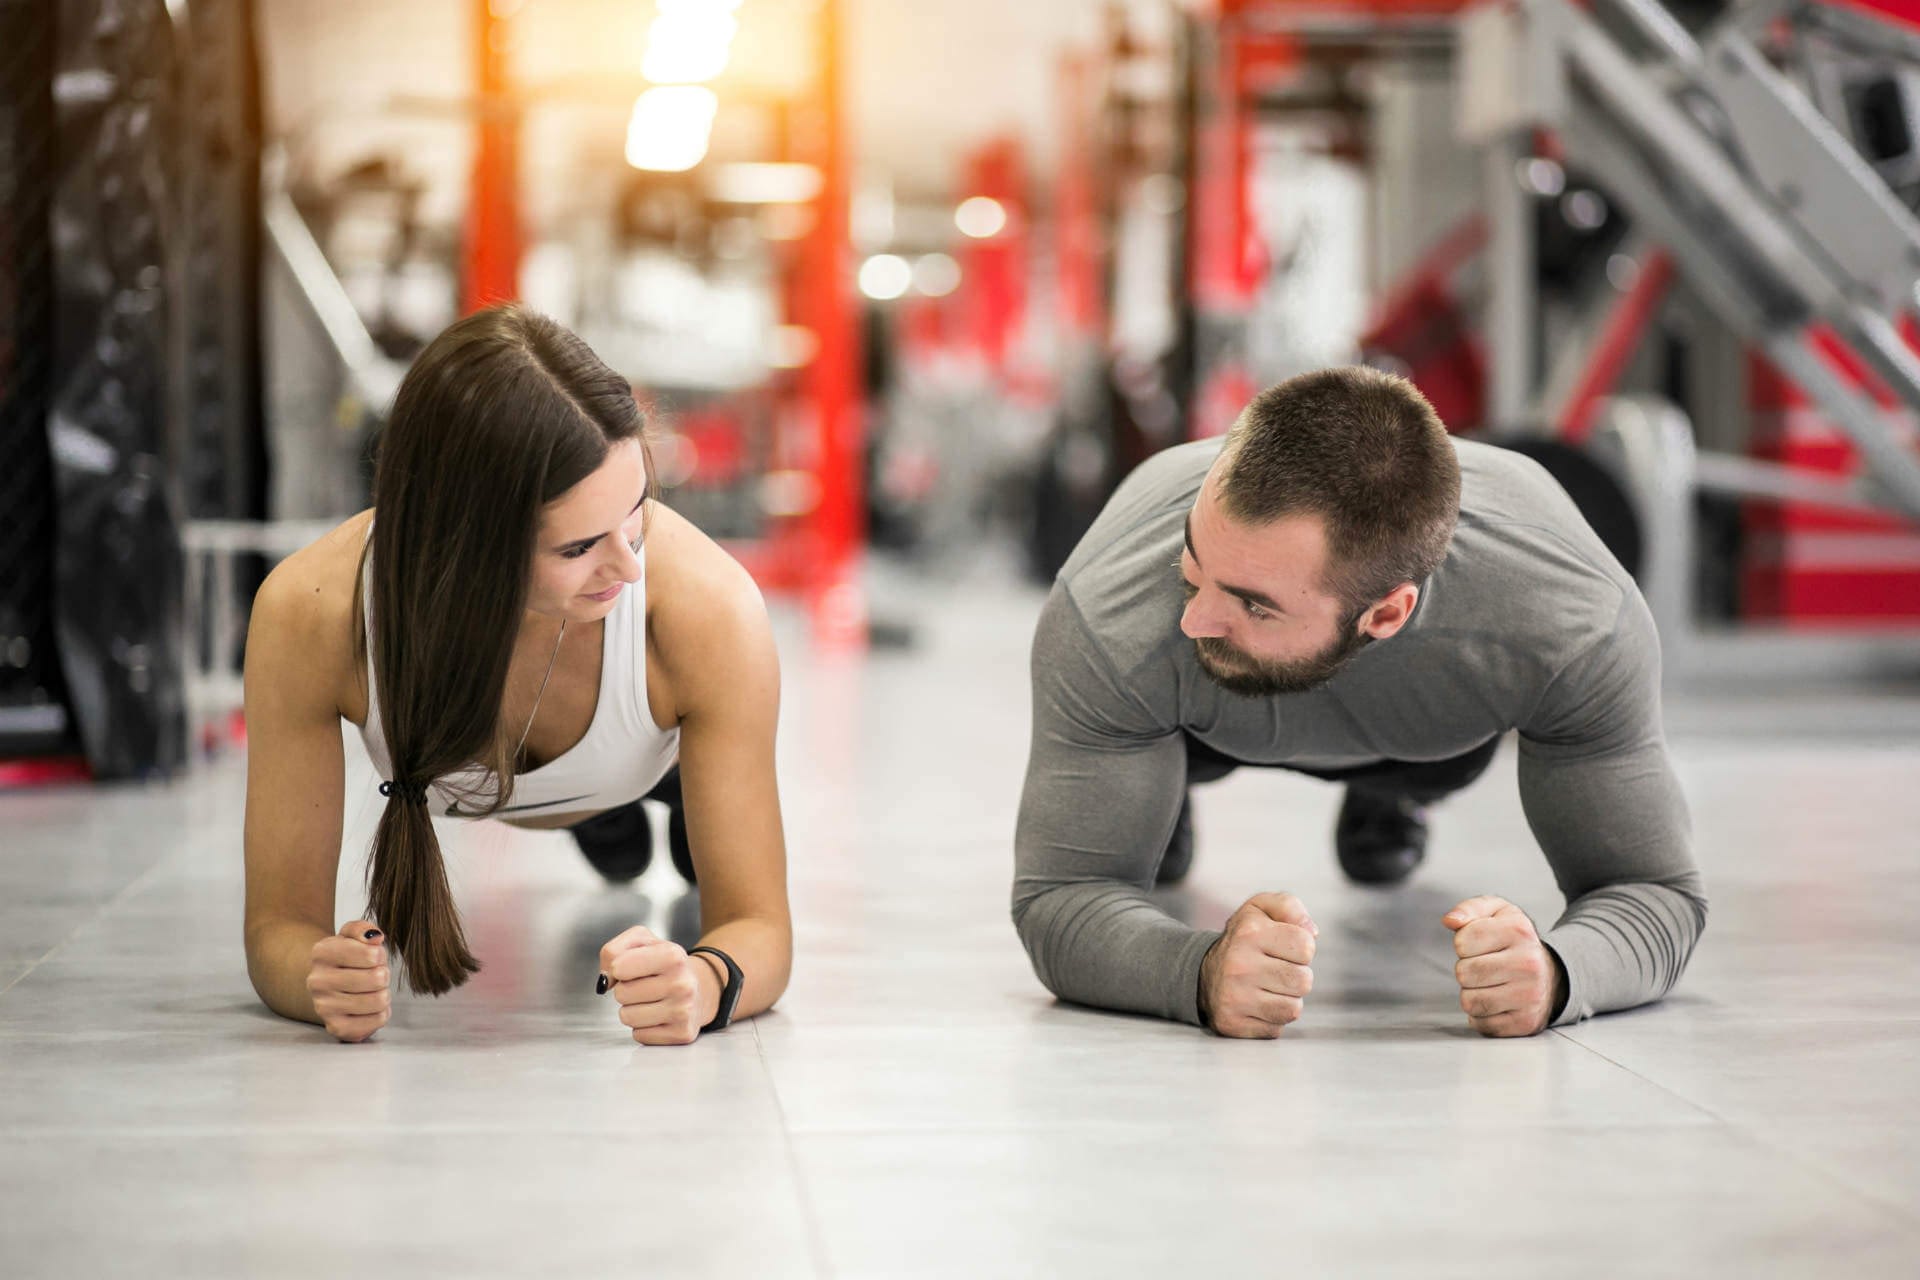 Full Body Workout vs. Split For Weight Loss - Which One Is Better?